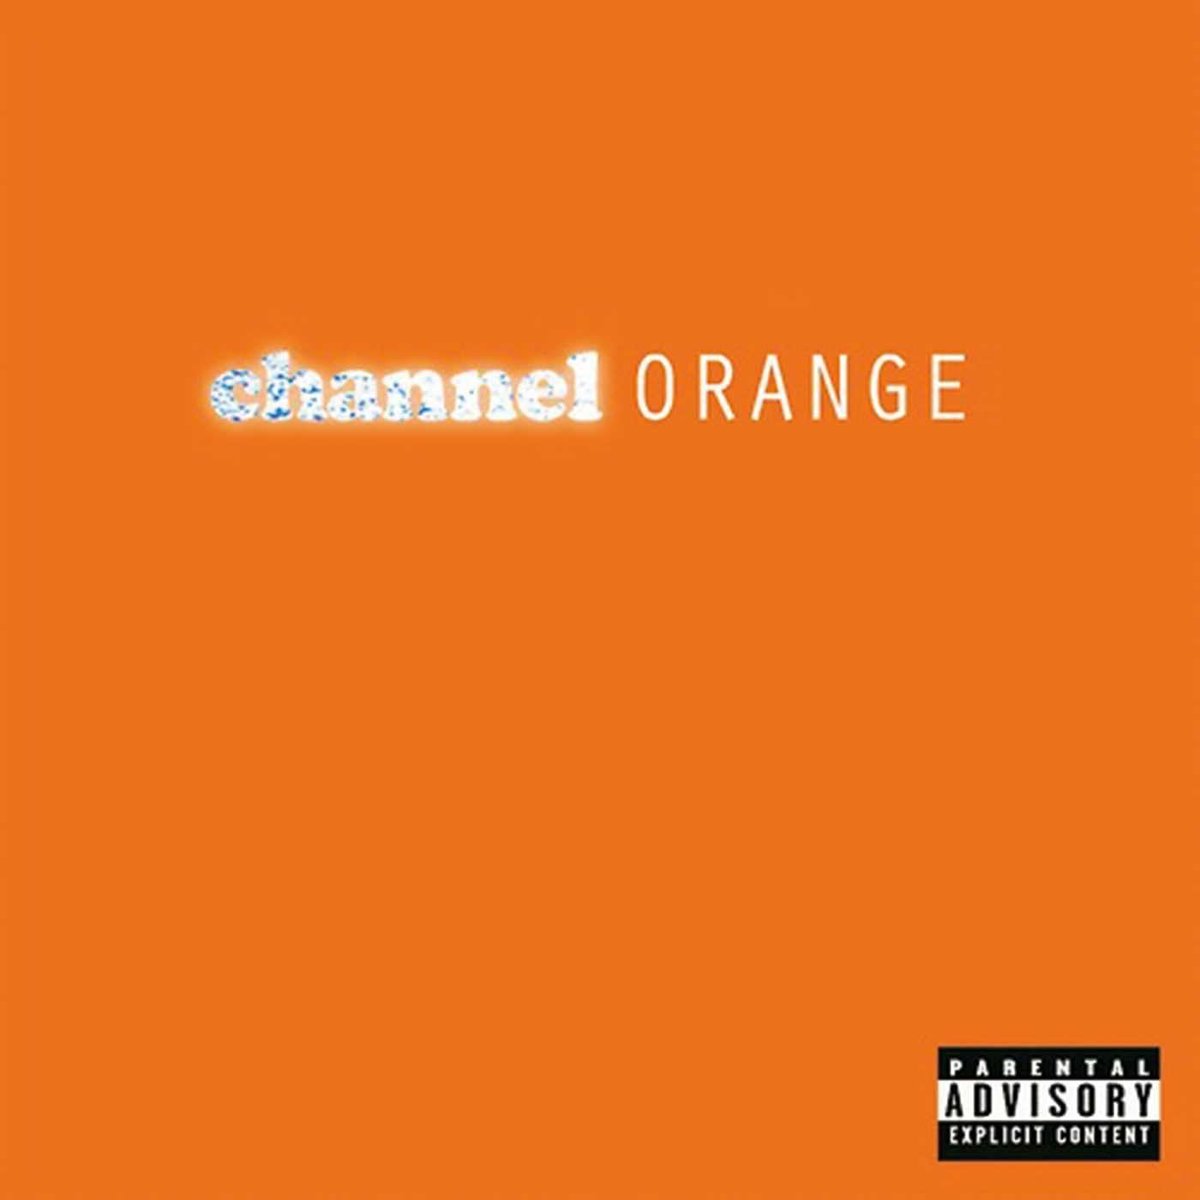 Albums that do it for me. * [This one comes with an *. I drew four cartoons for Frank Ocean for the album after this called Blonde. It was a lot of work. I think I redrew each cartoon 2-4 times. I still like Orange slightly better than Blonde.]